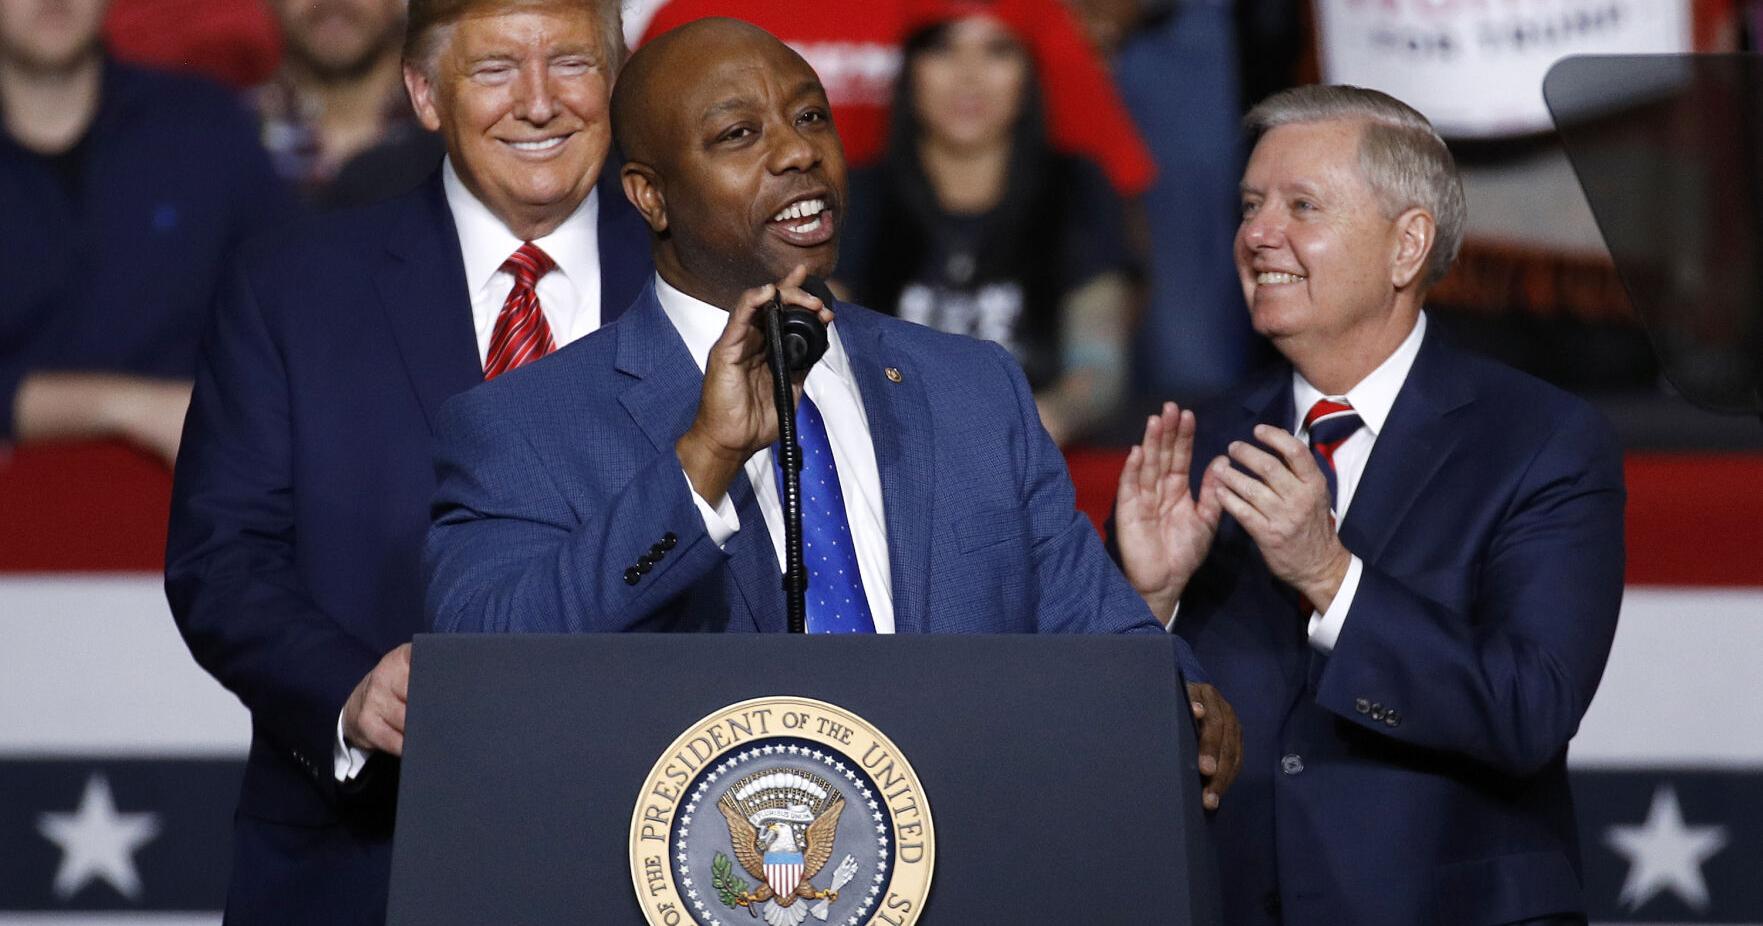 Trump's welcome of Sen. Tim Scott into the 2024 race shows his calculus